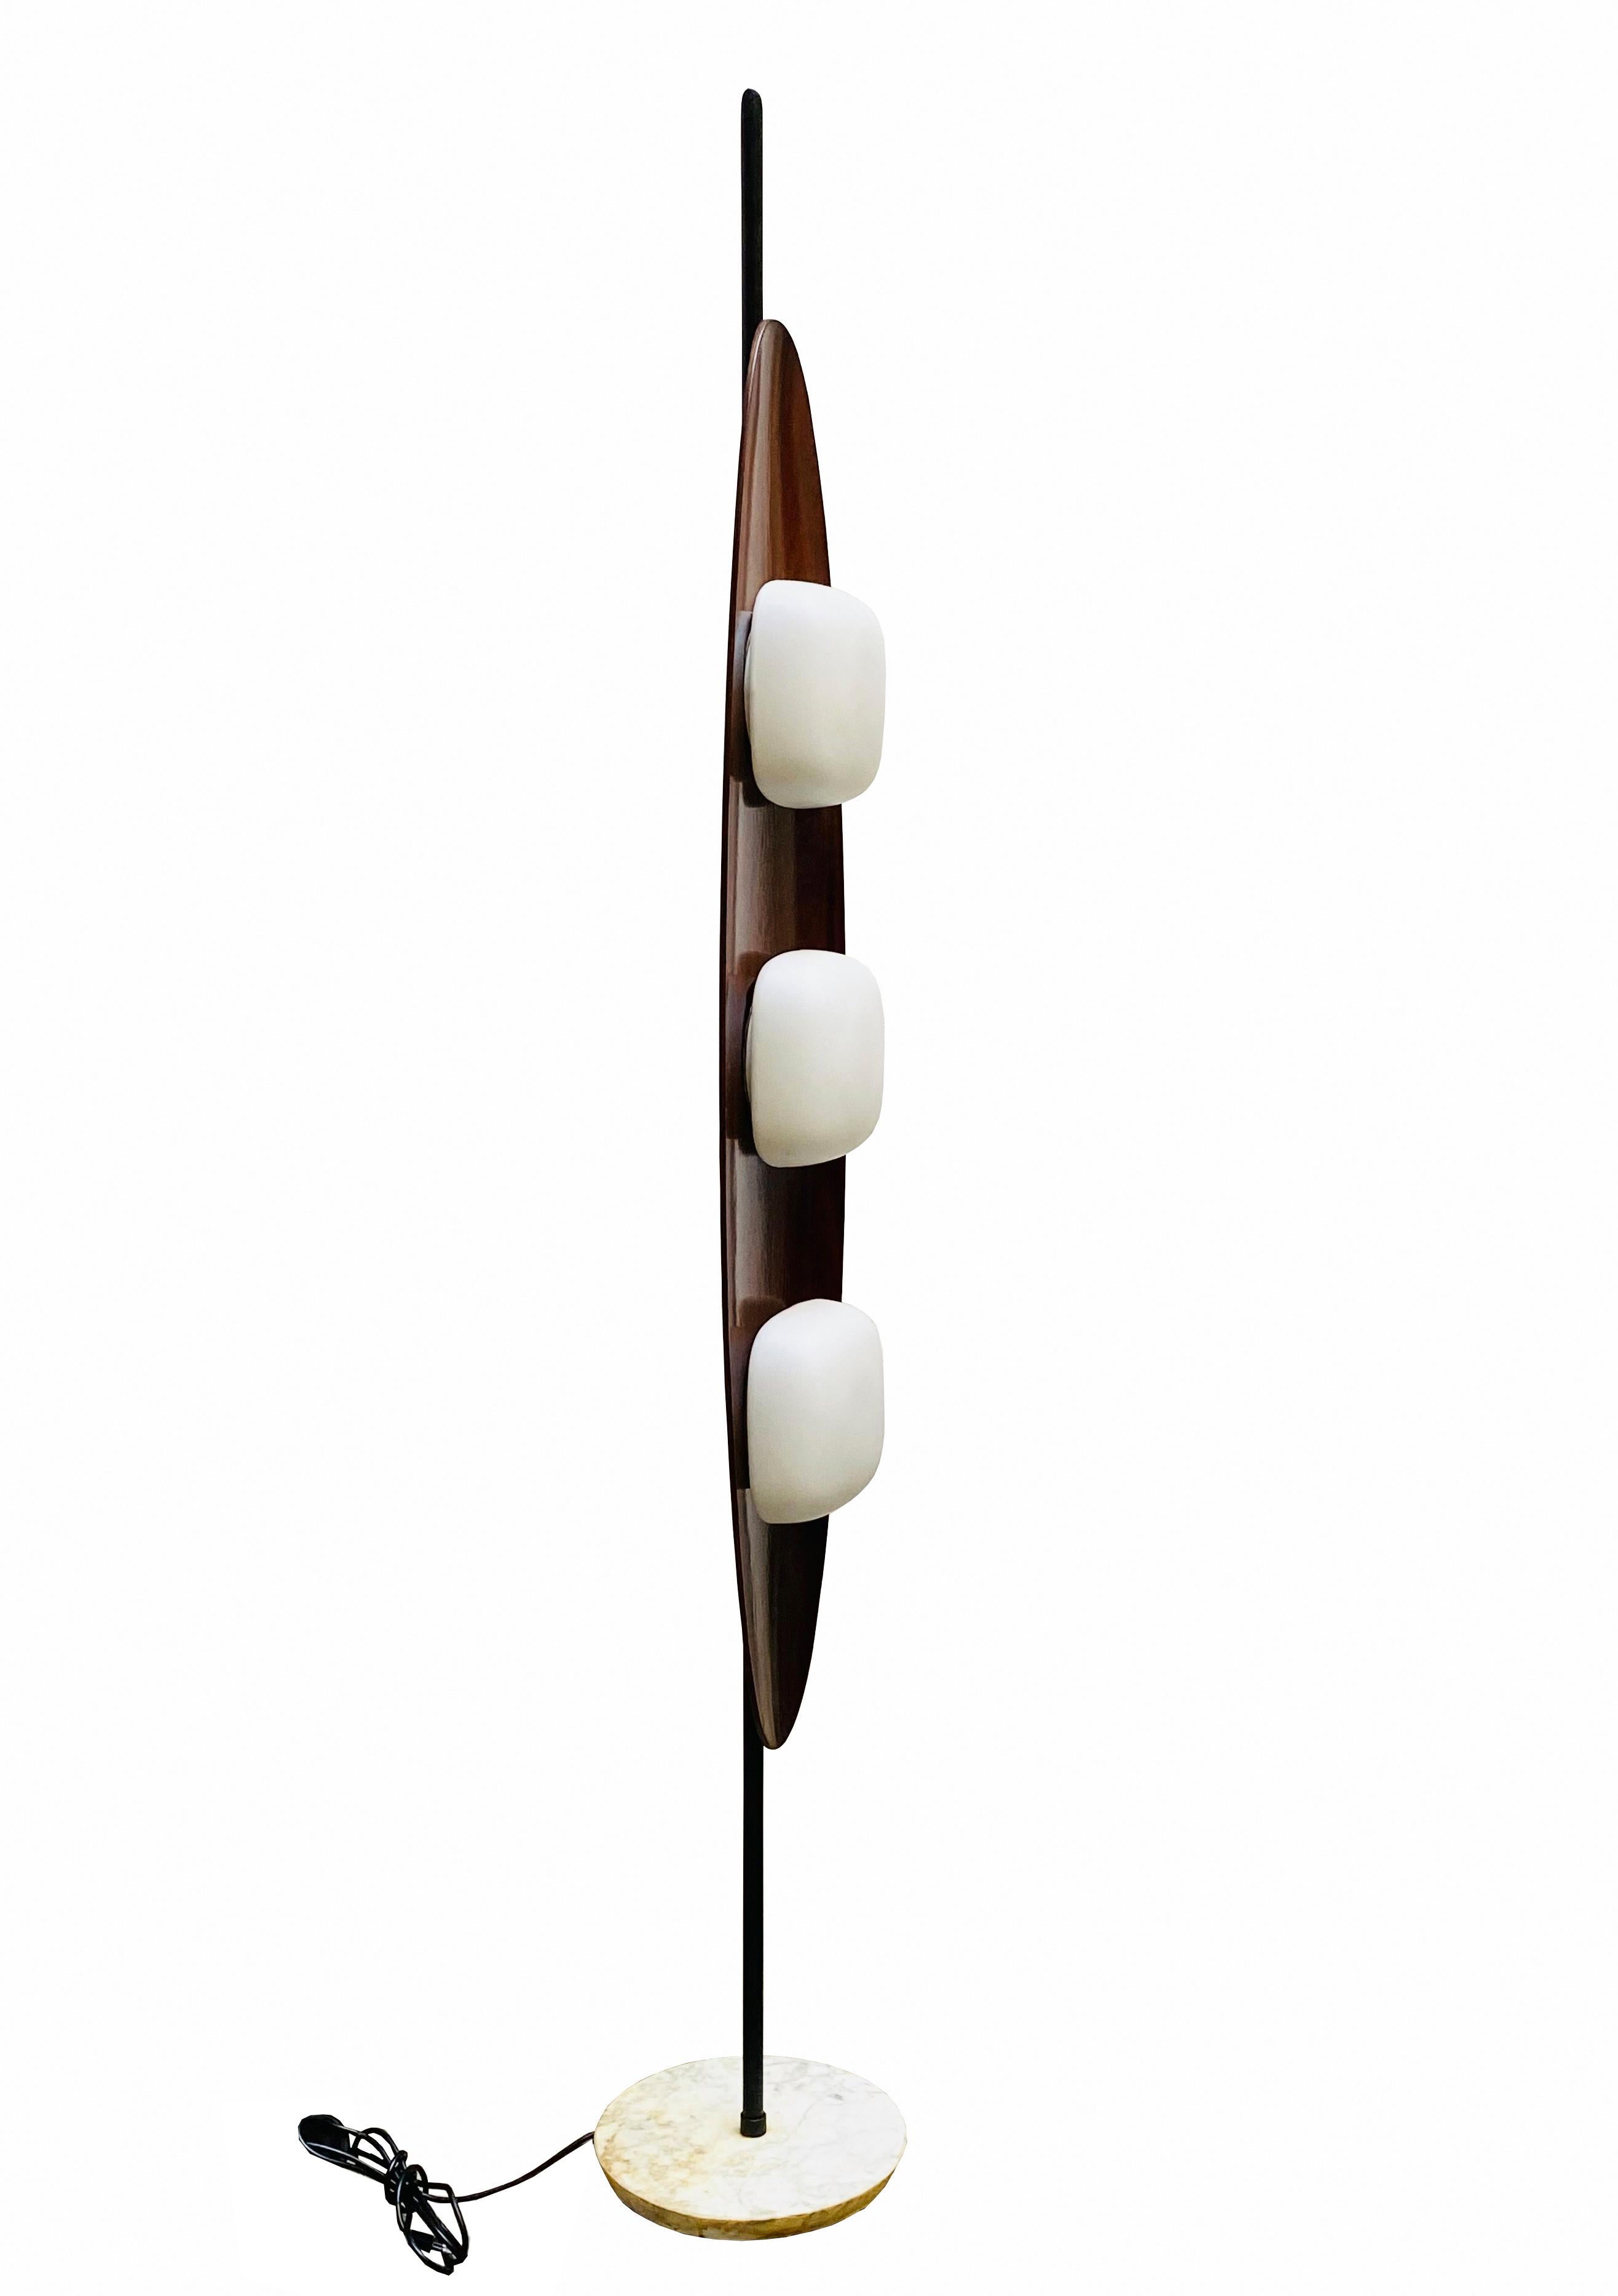 Iconic floor lamp mod. Surf by Italian designer Gioffredo Reggiani in the 1960s
Marble base, black lacquered metal stem, teak surf and 3 opaline glass diffusers